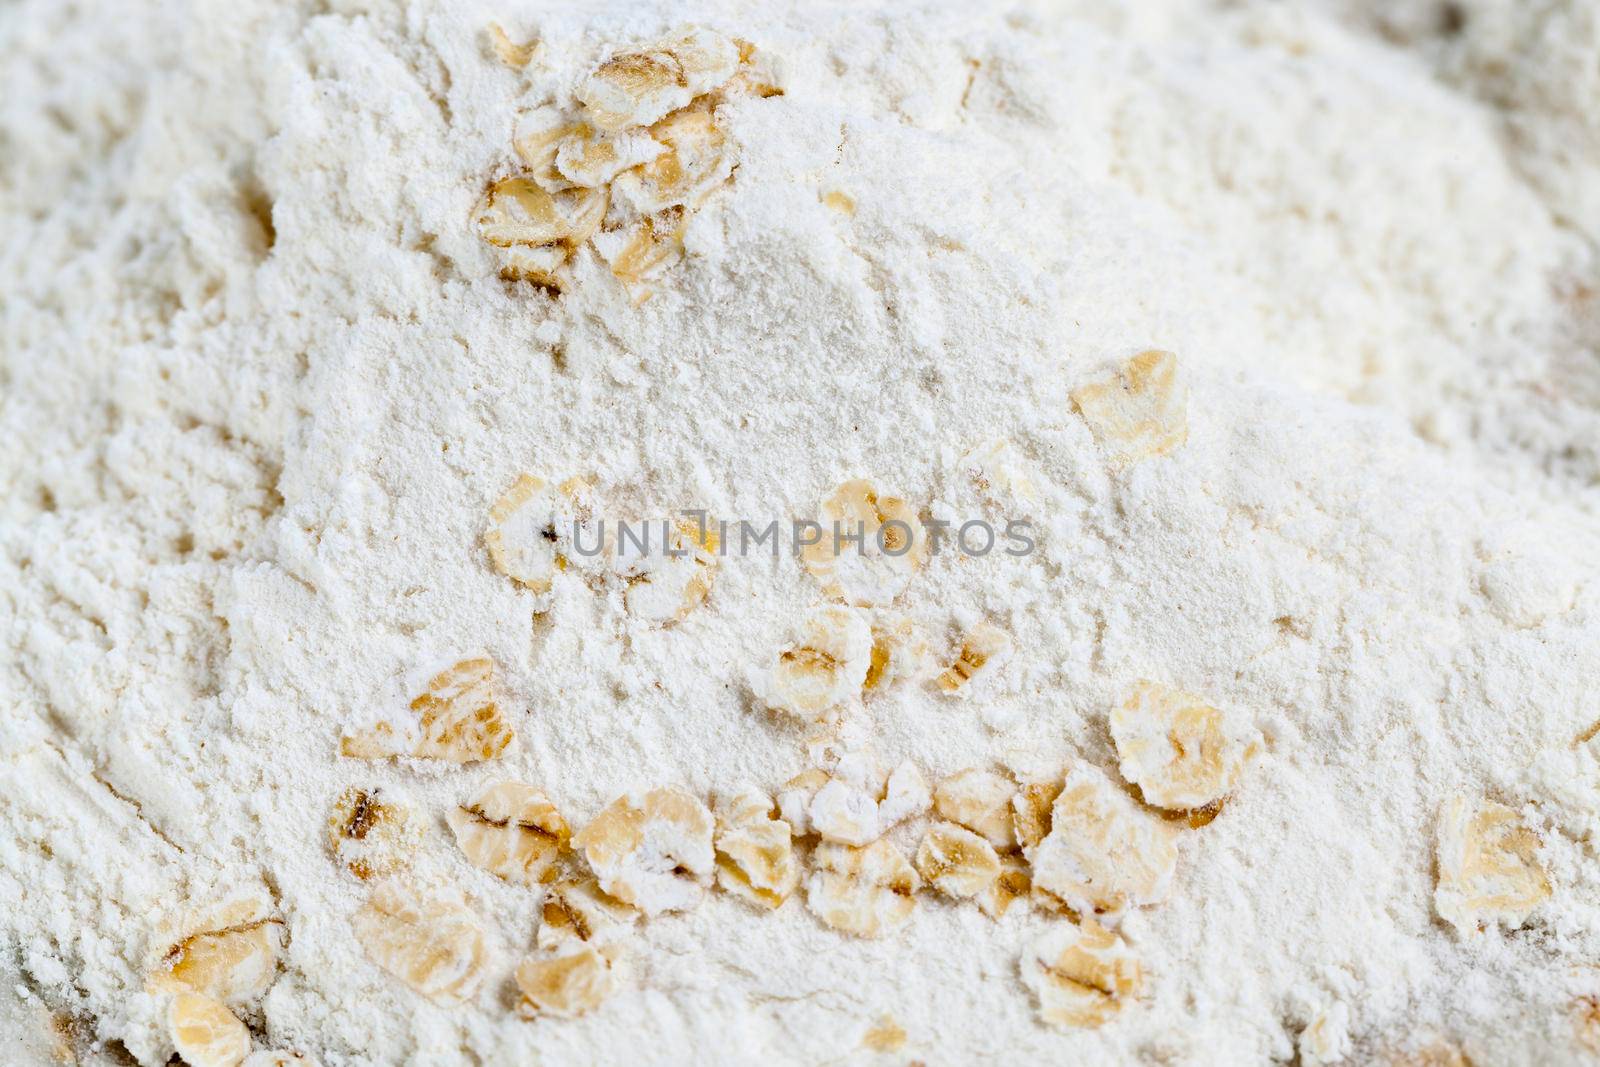 white wheat flour with oat flakes, close-up photo on wooden surface